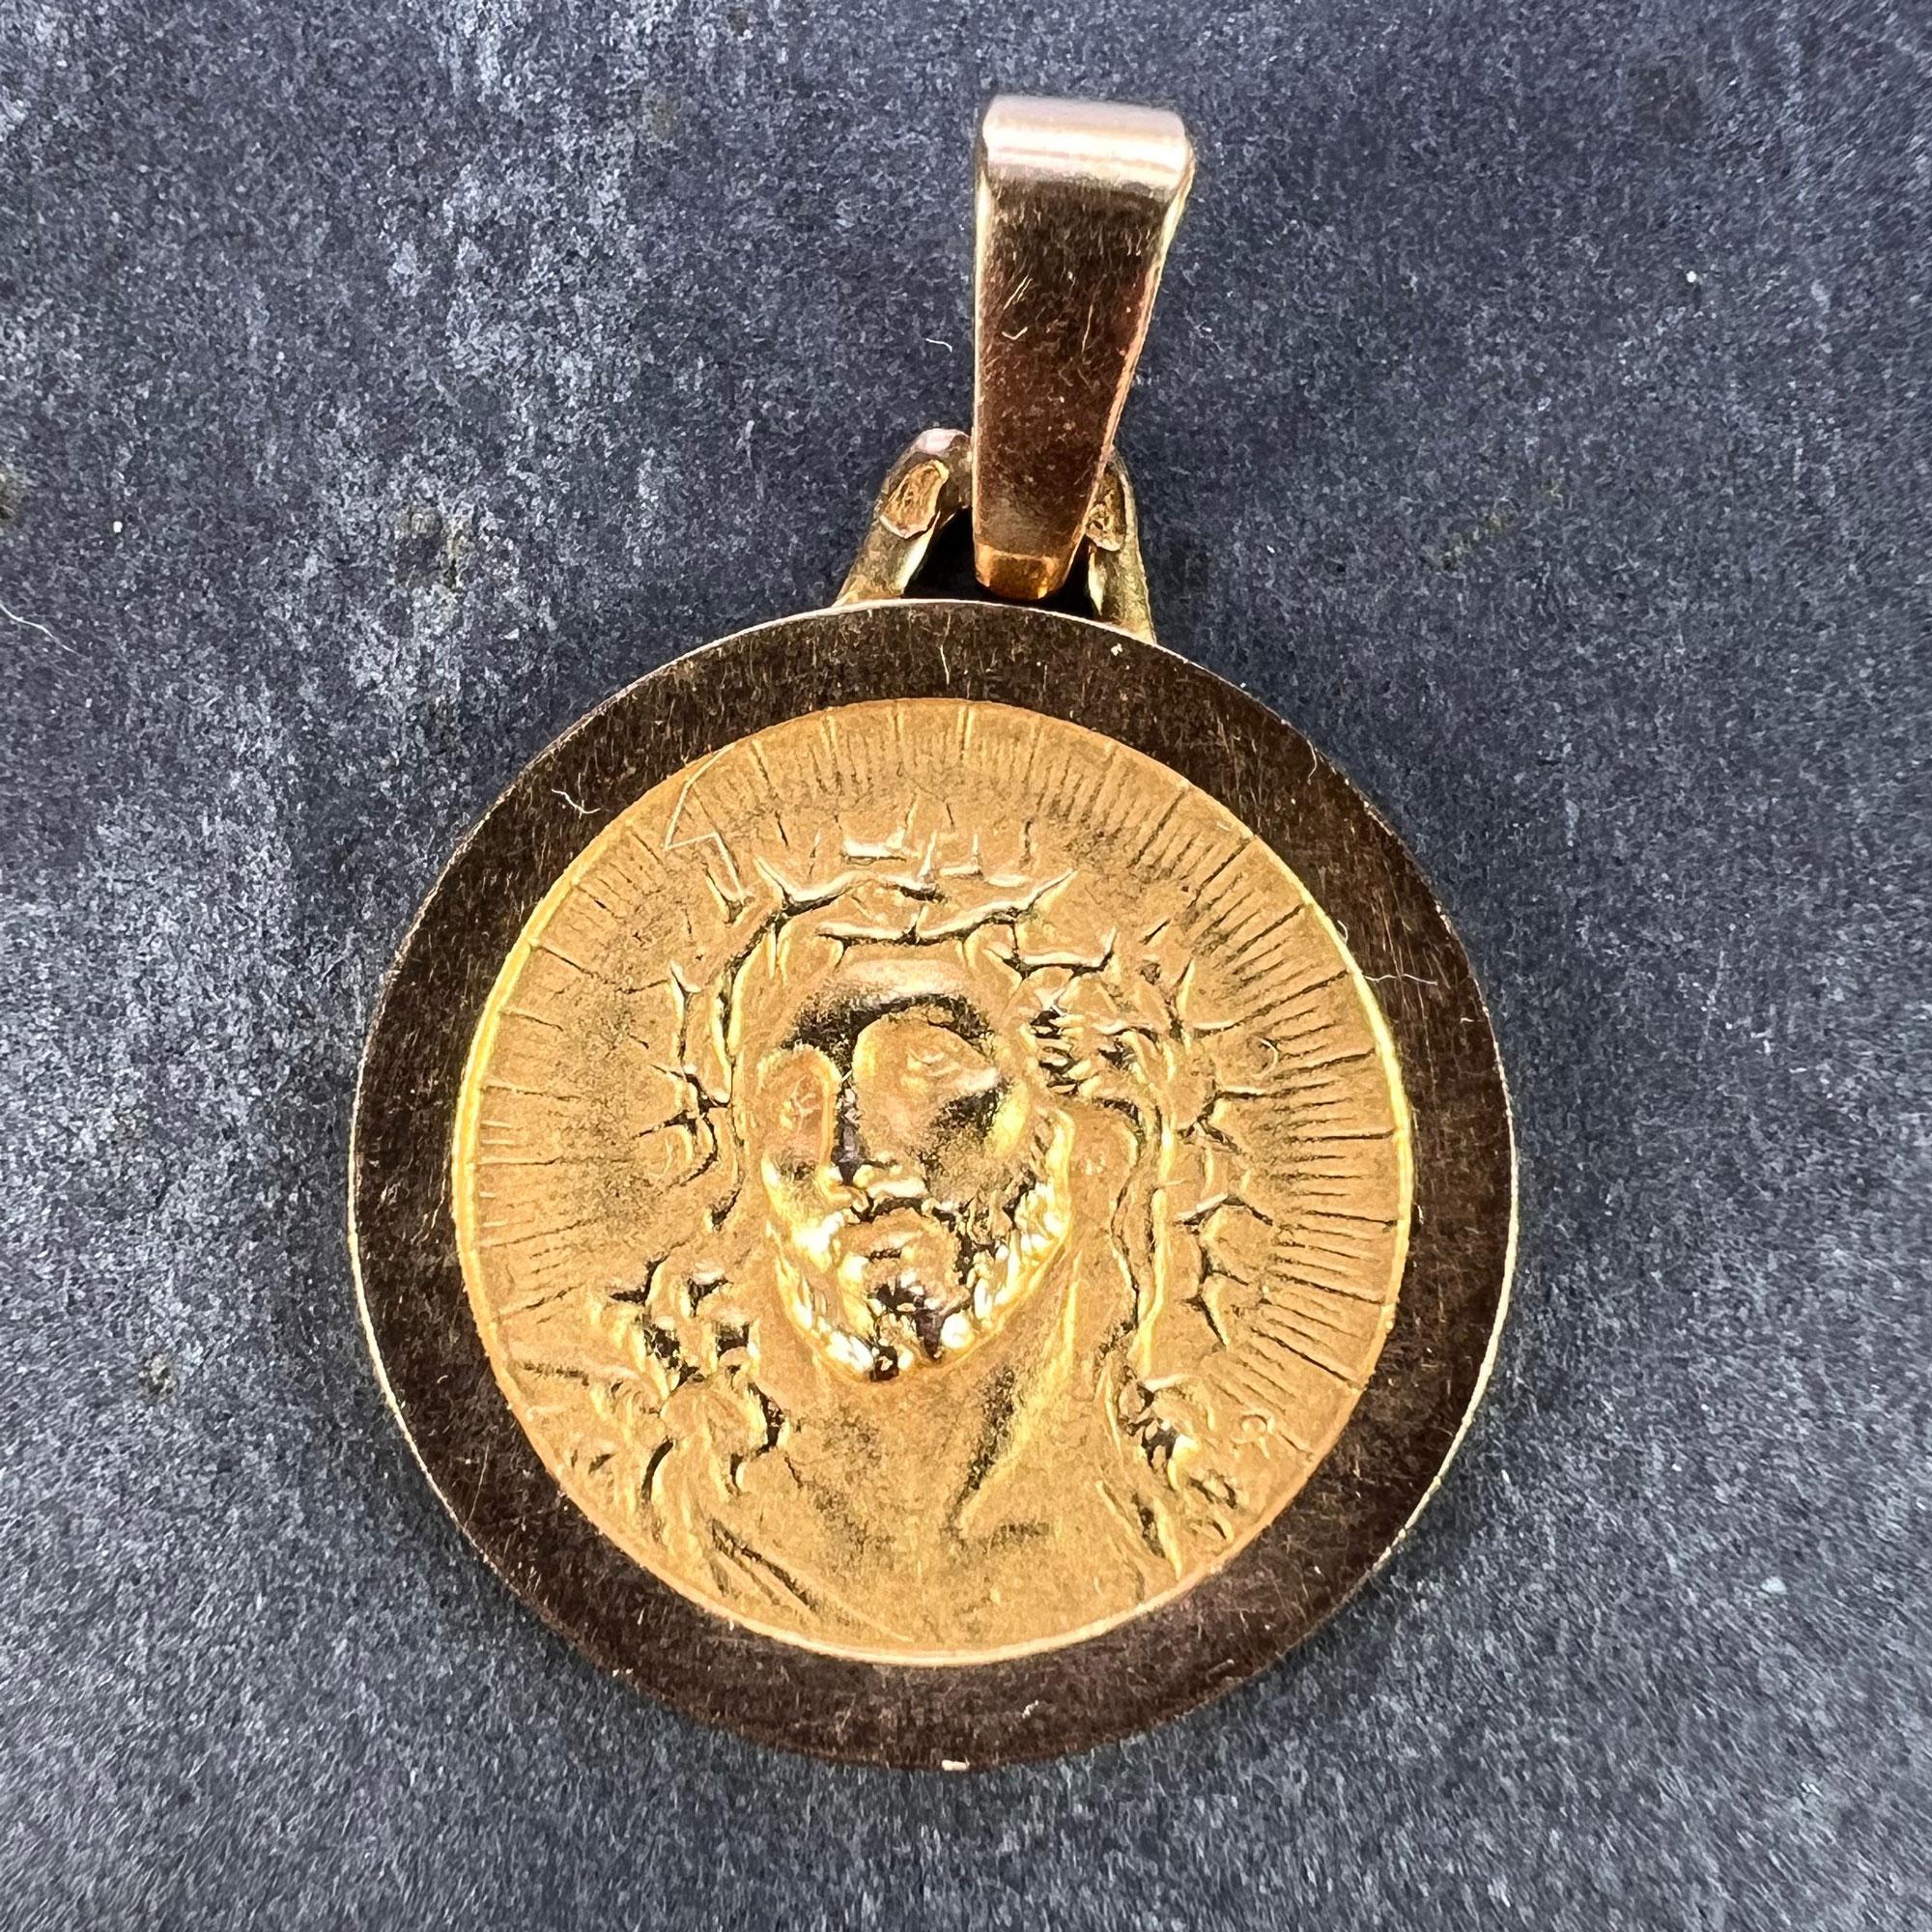 A French 18 karat (18K) yellow gold charm pendant designed as a round medal depicting Christ wearing the Crown of Thorns, with a radiant halo surrounding him. Stamped with the eagle’s head for 18 karat gold and French manufacture, along with an